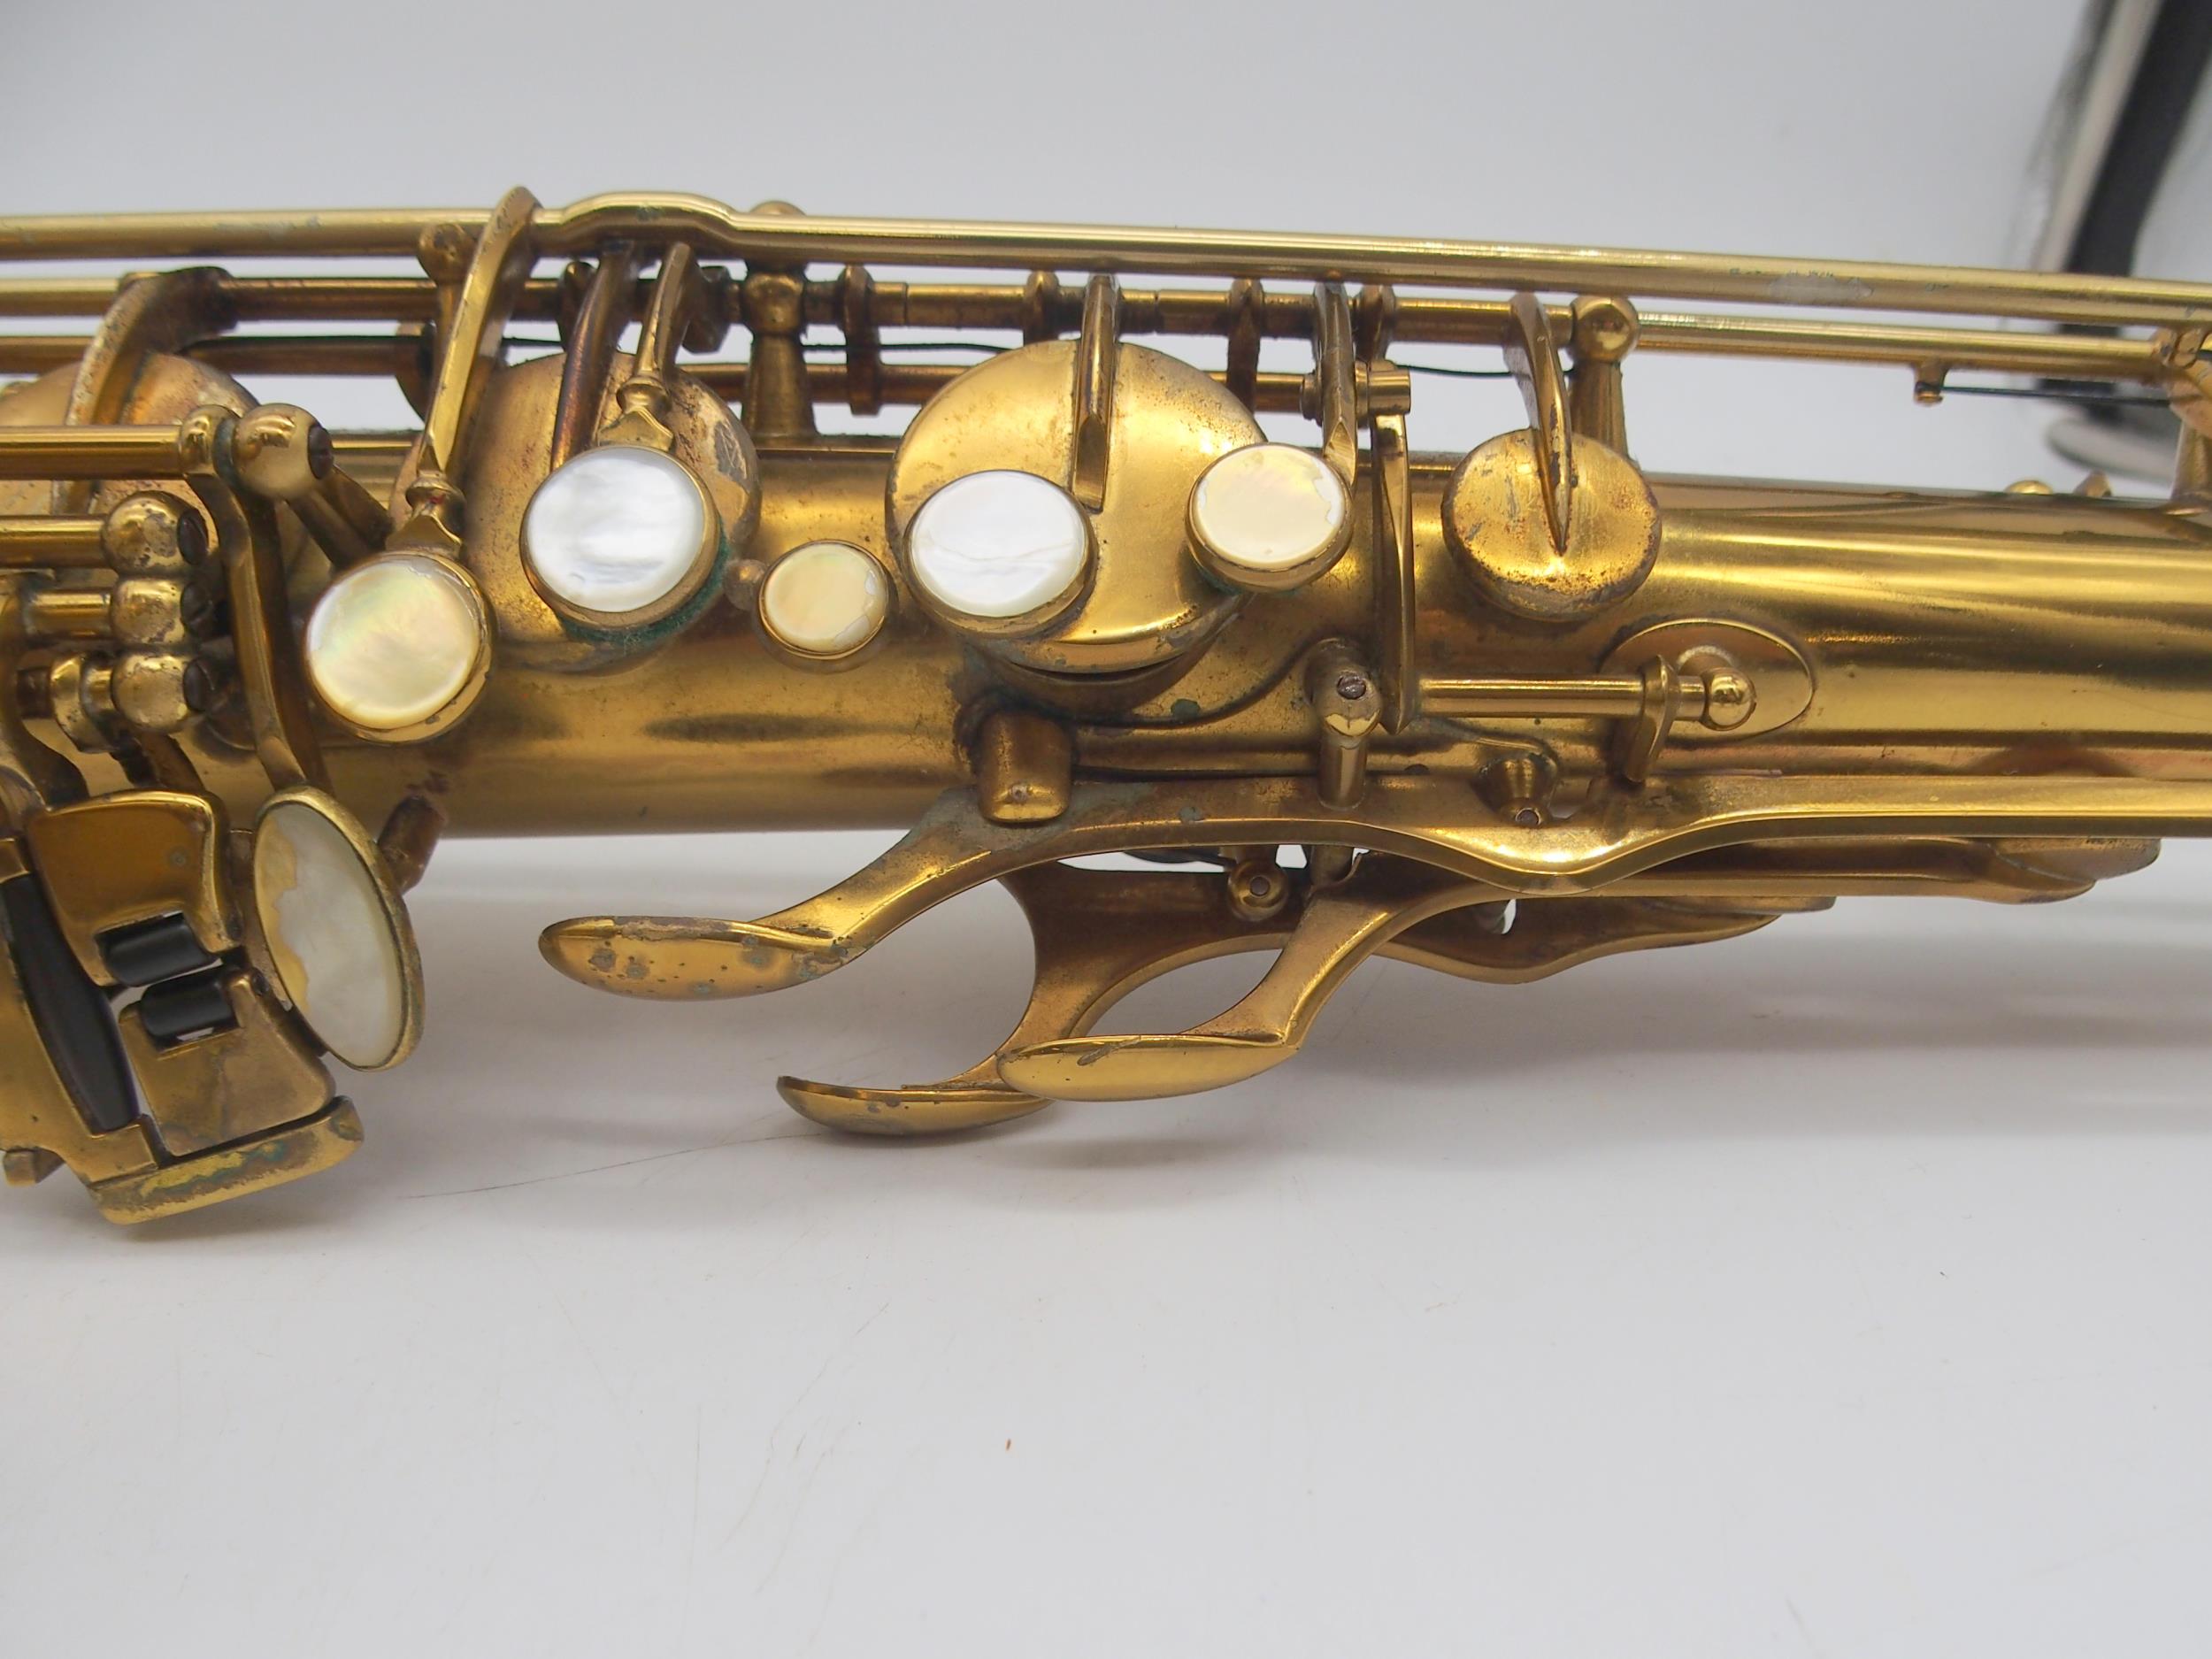 **WITHDRAWN** Pennsylvania Special Baritone Saxophone serial number 261180 engraved "Pensyl - Image 21 of 33